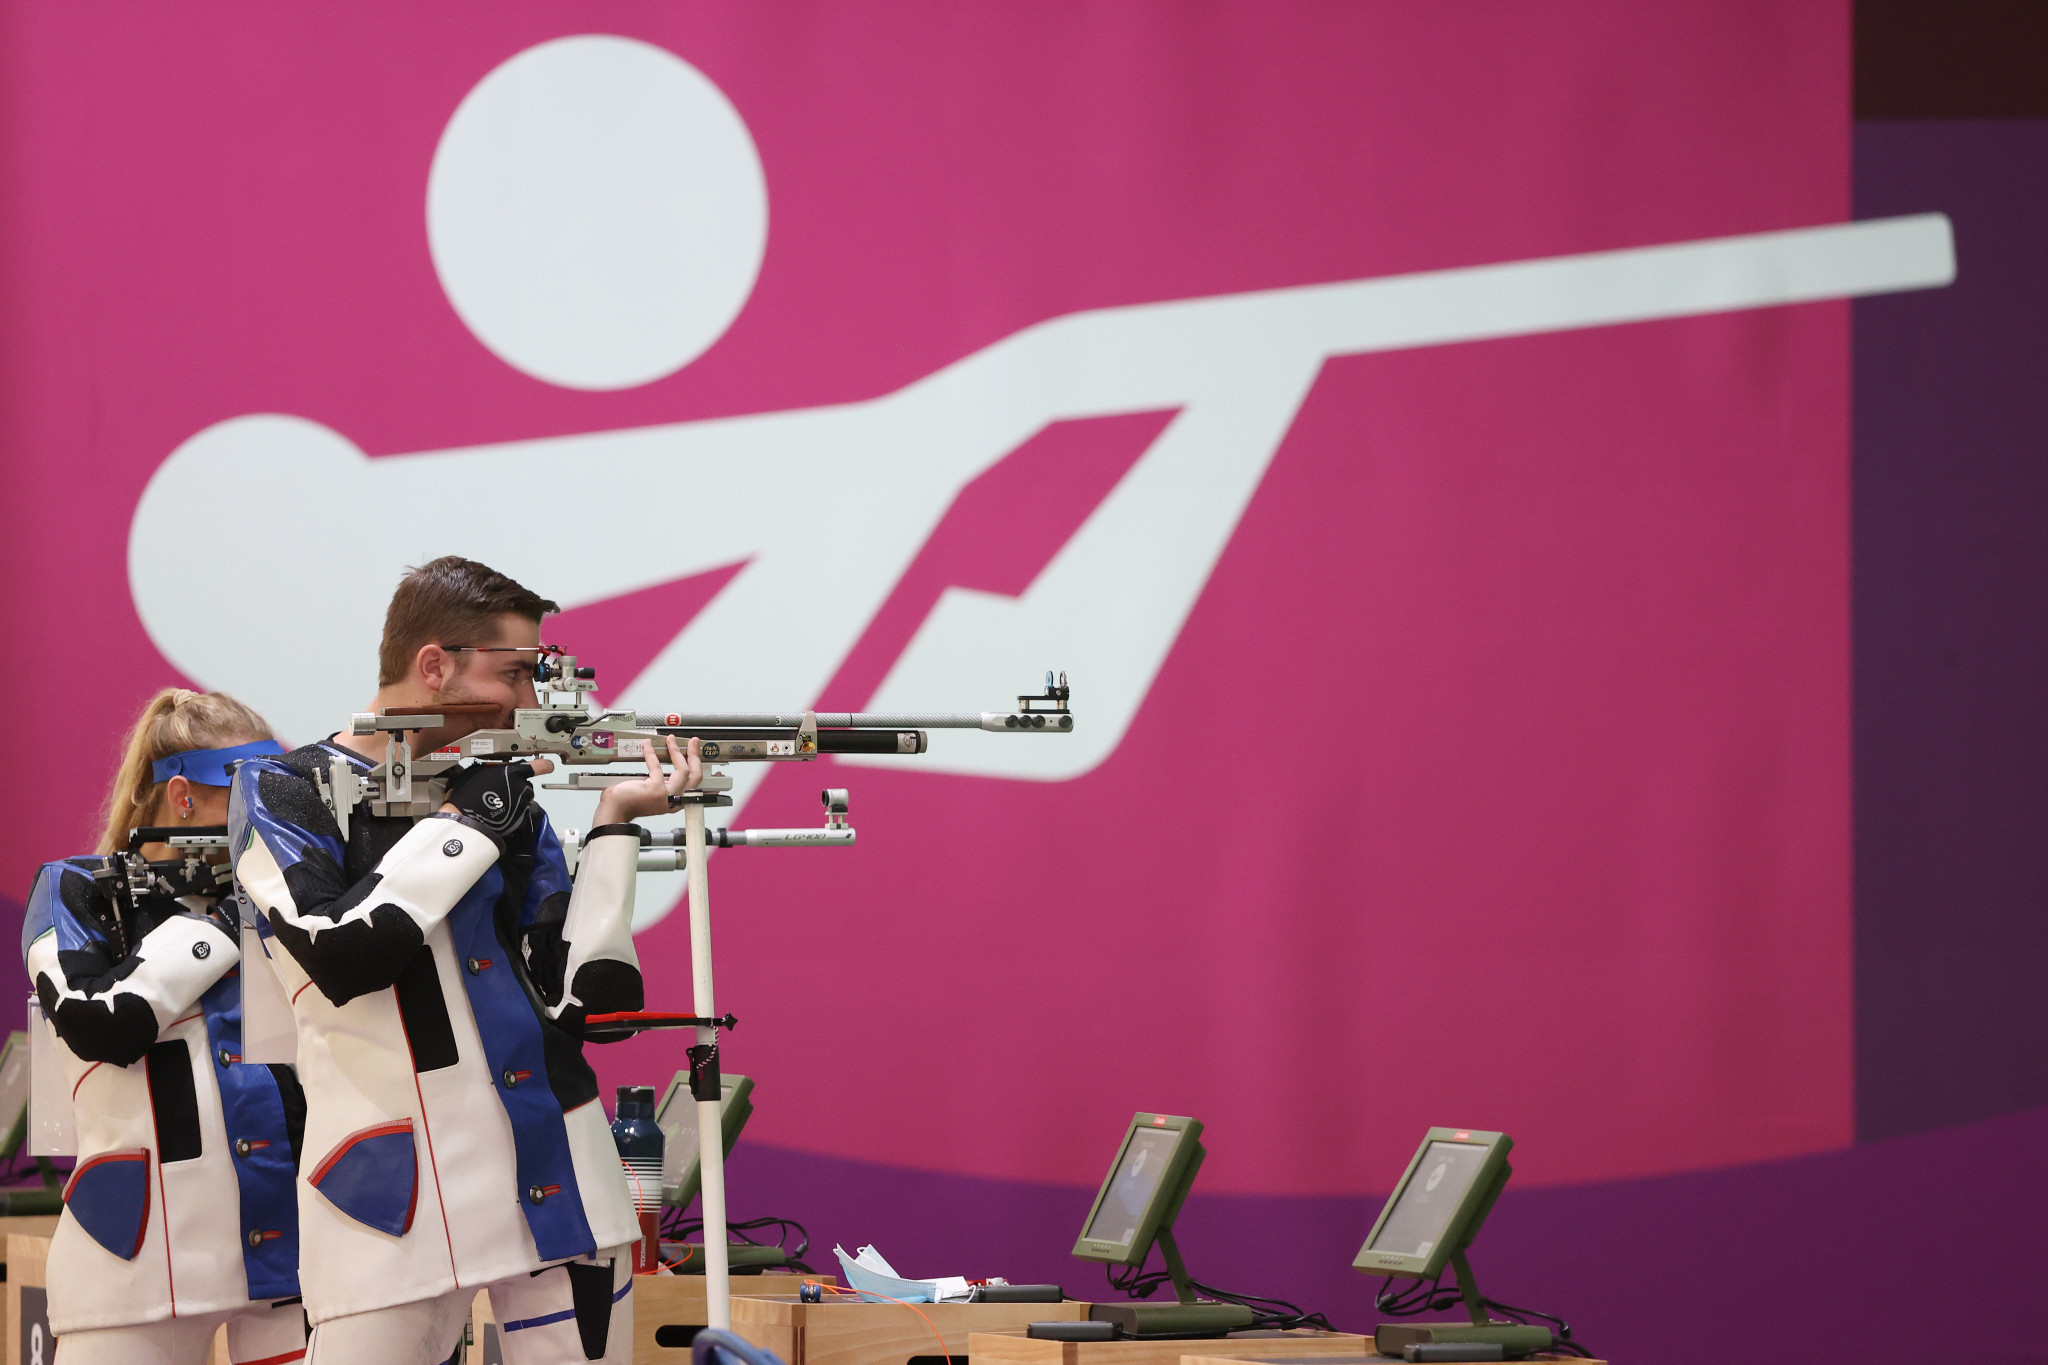 Shaner set to take centre stage at ISSF Shooting World Cup in Rio